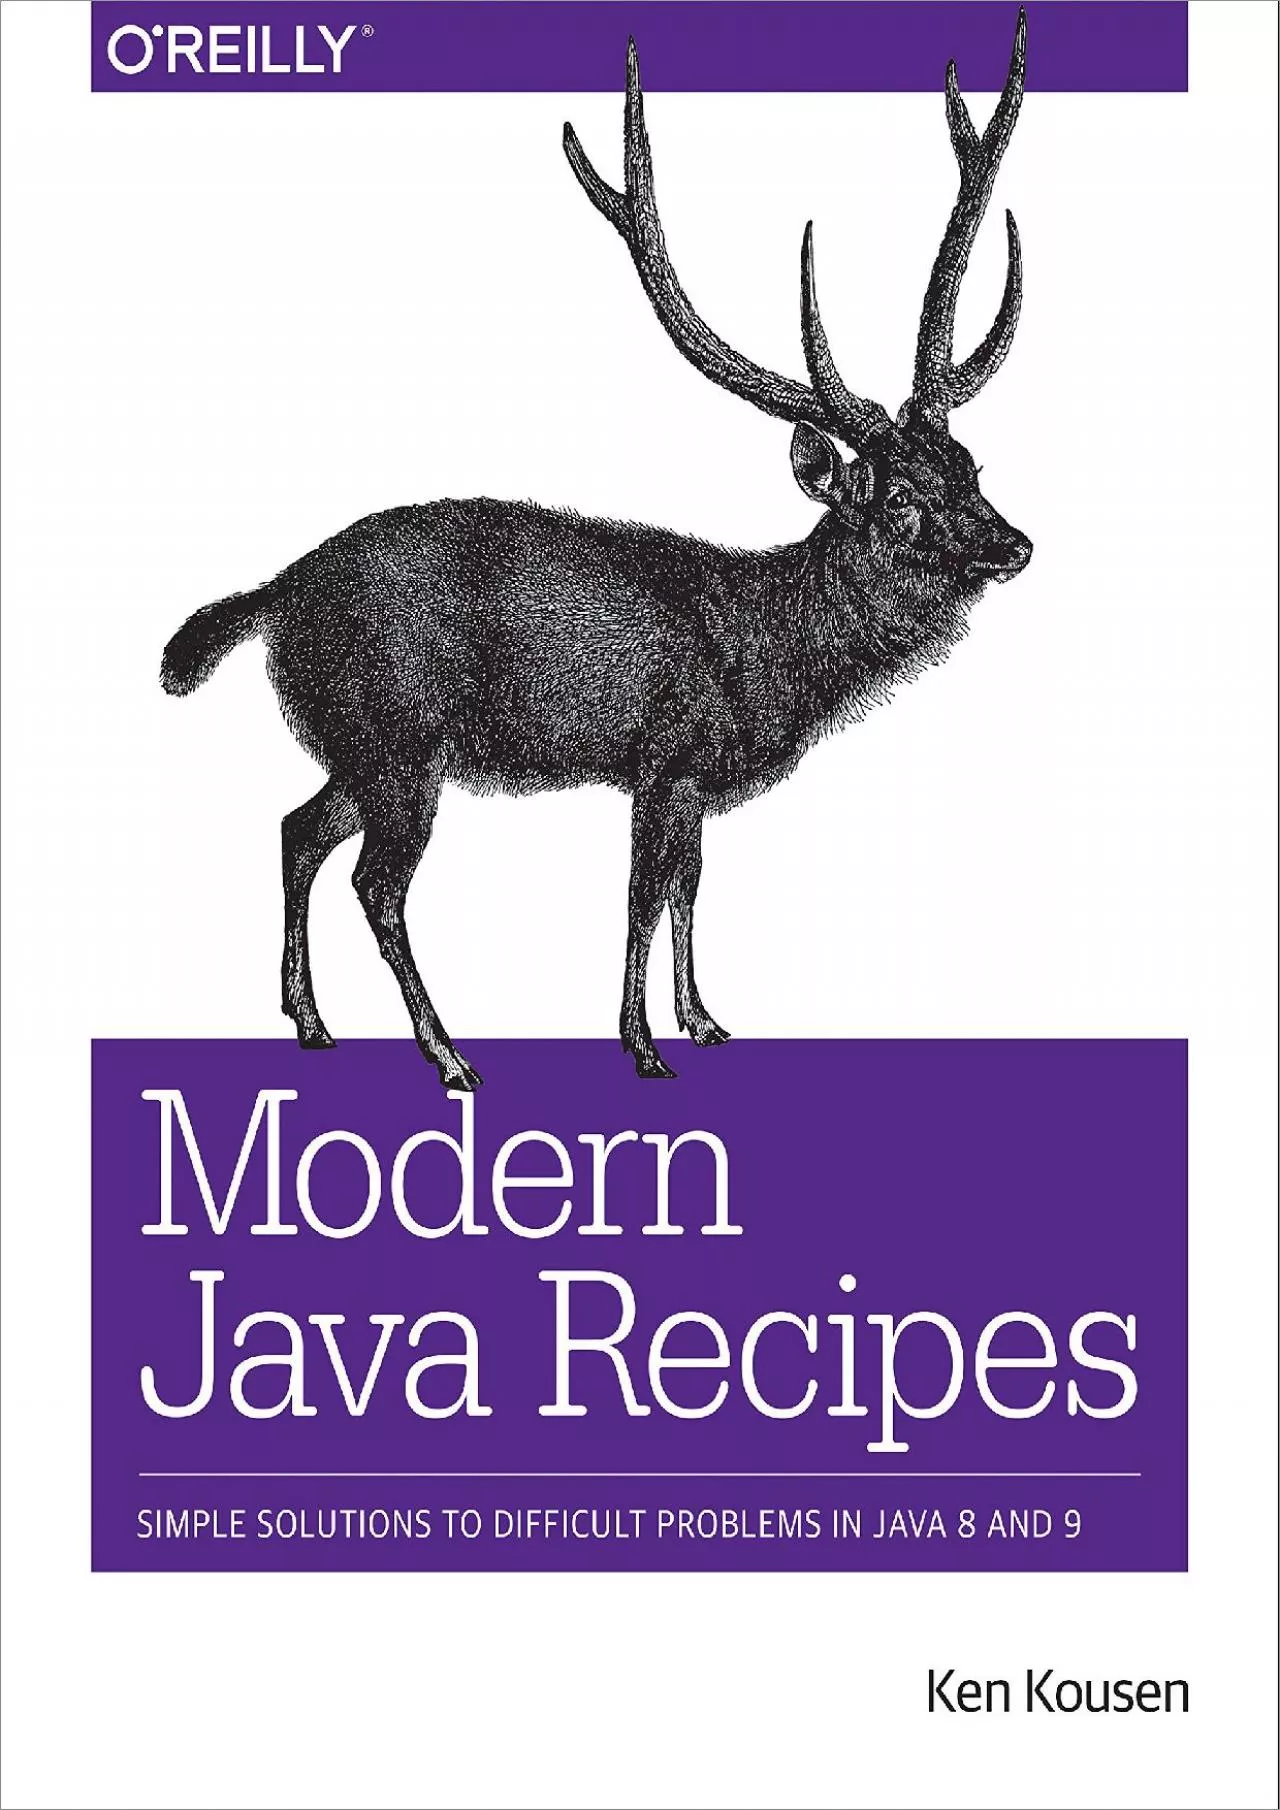 [READING BOOK]-Modern Java Recipes: Simple Solutions to Difficult Problems in Java 8 and